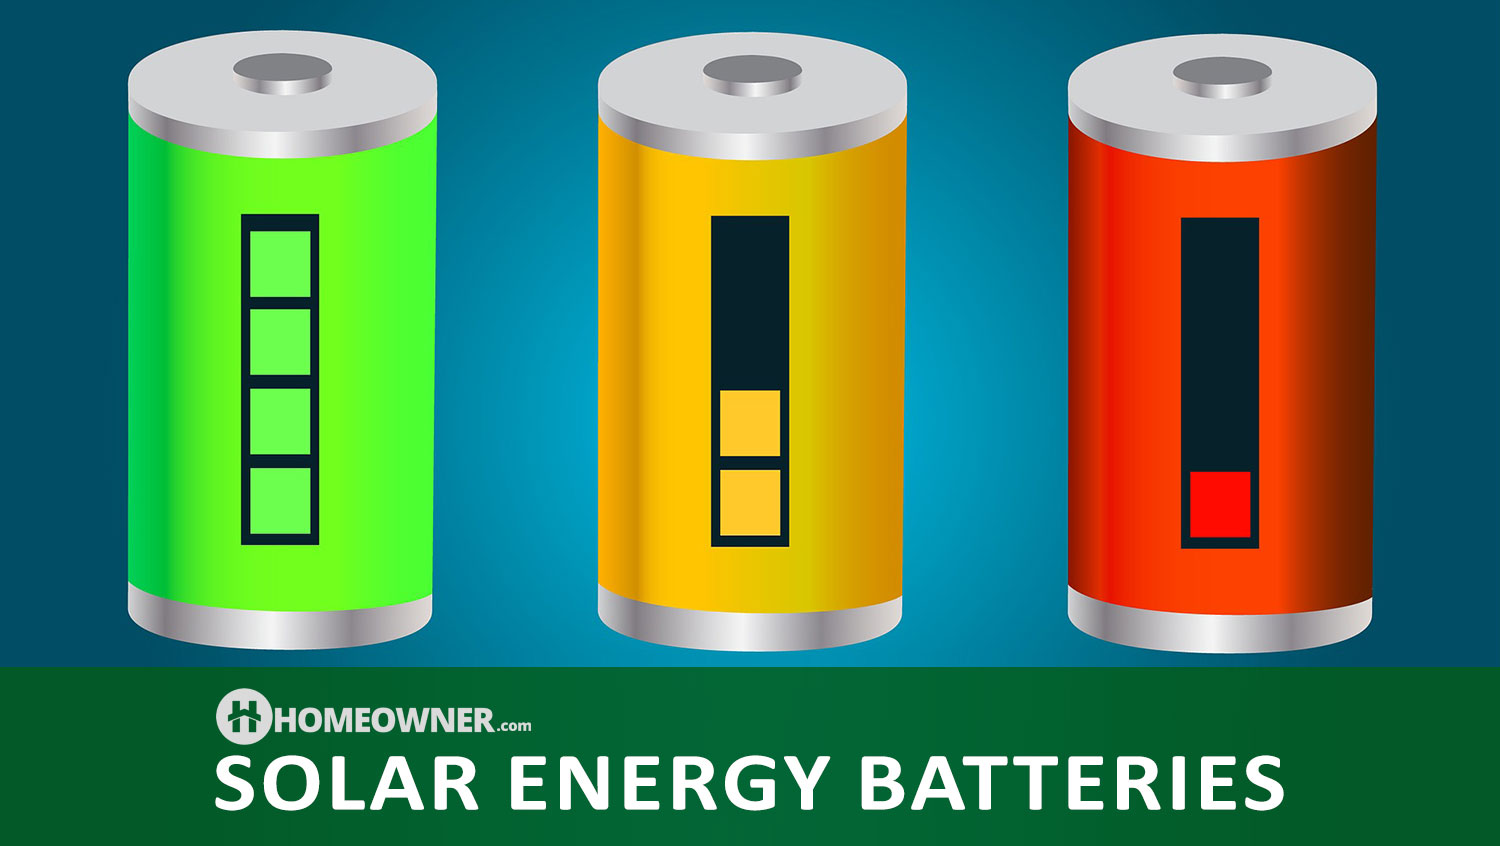 How To Choose the Right Batteries for Your Solar Home